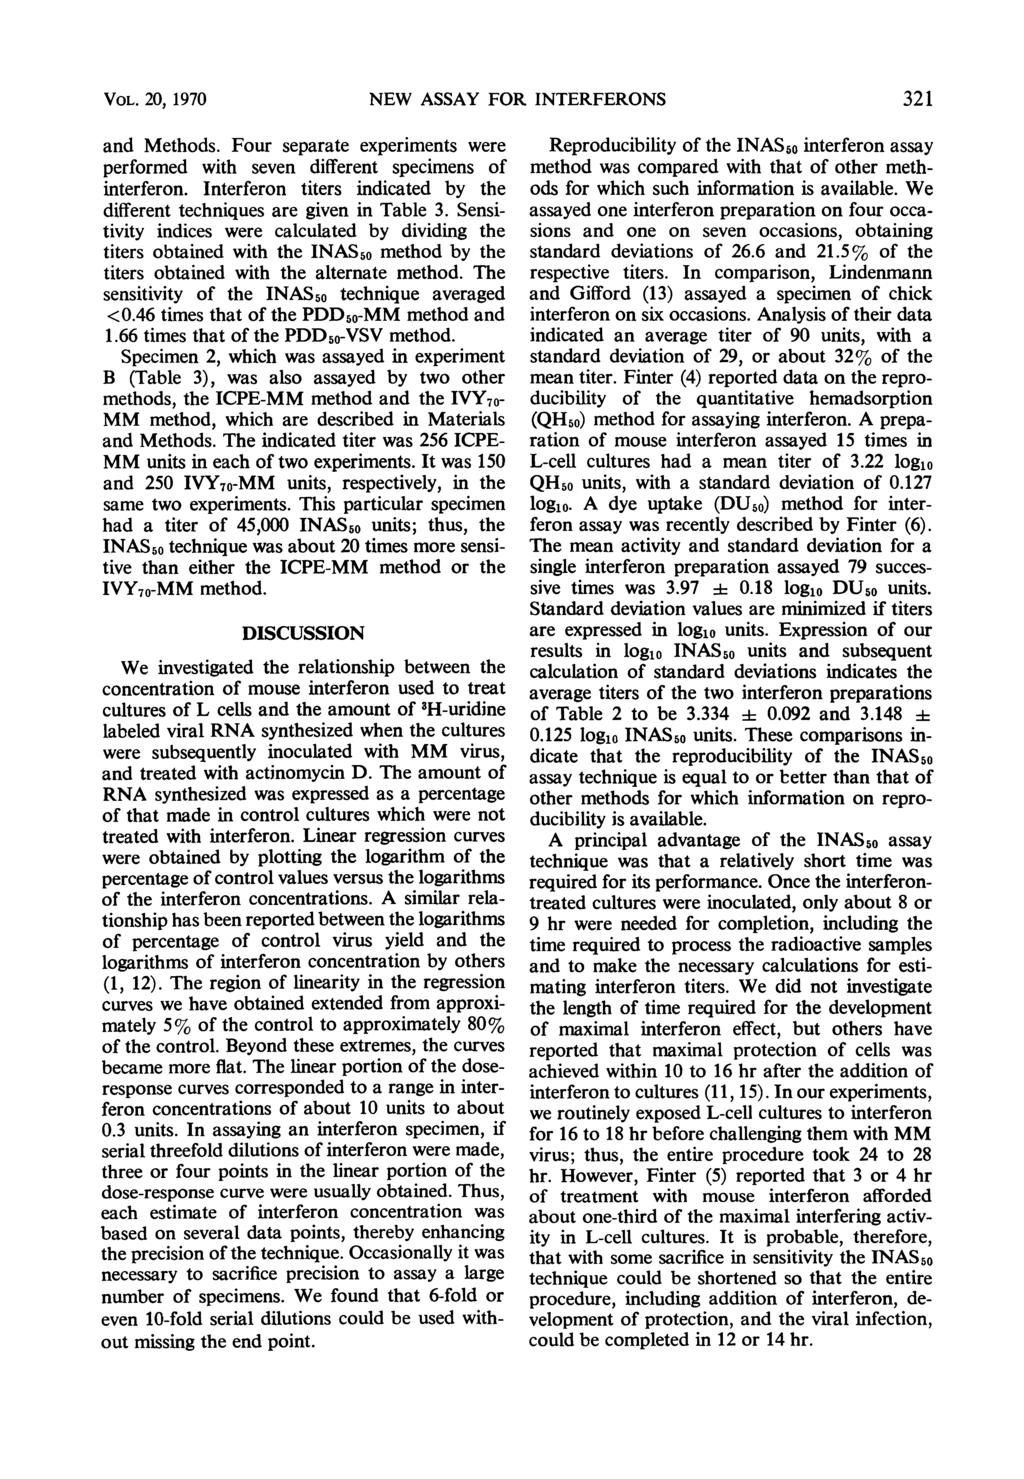 VOL. 20, 1970 NEW ASSAY FOR INTERFERONS and Methods. Four separate experiments were performed with seven different specimens of interferon.